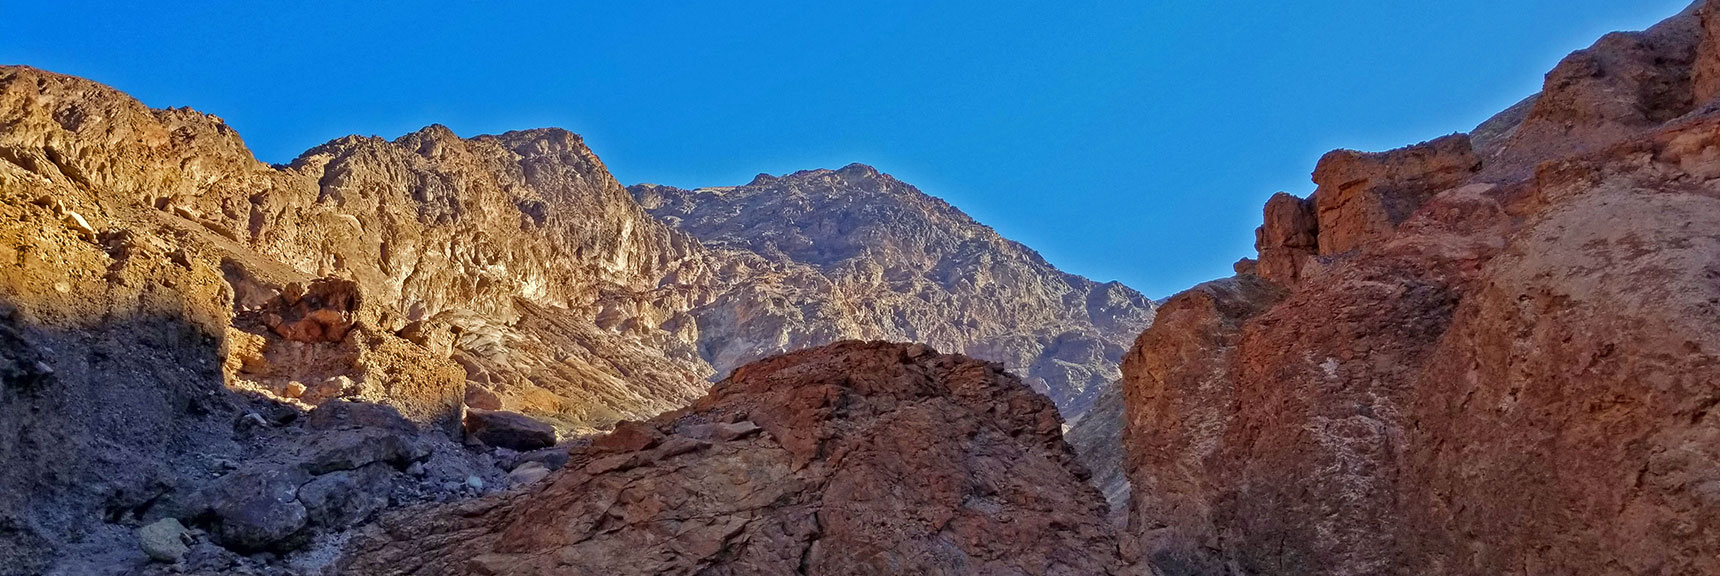 View Toward Mt. Perry Area from Dry Waterfall Bypass | Natural Bridge Canyon | Death Valley National Park, California